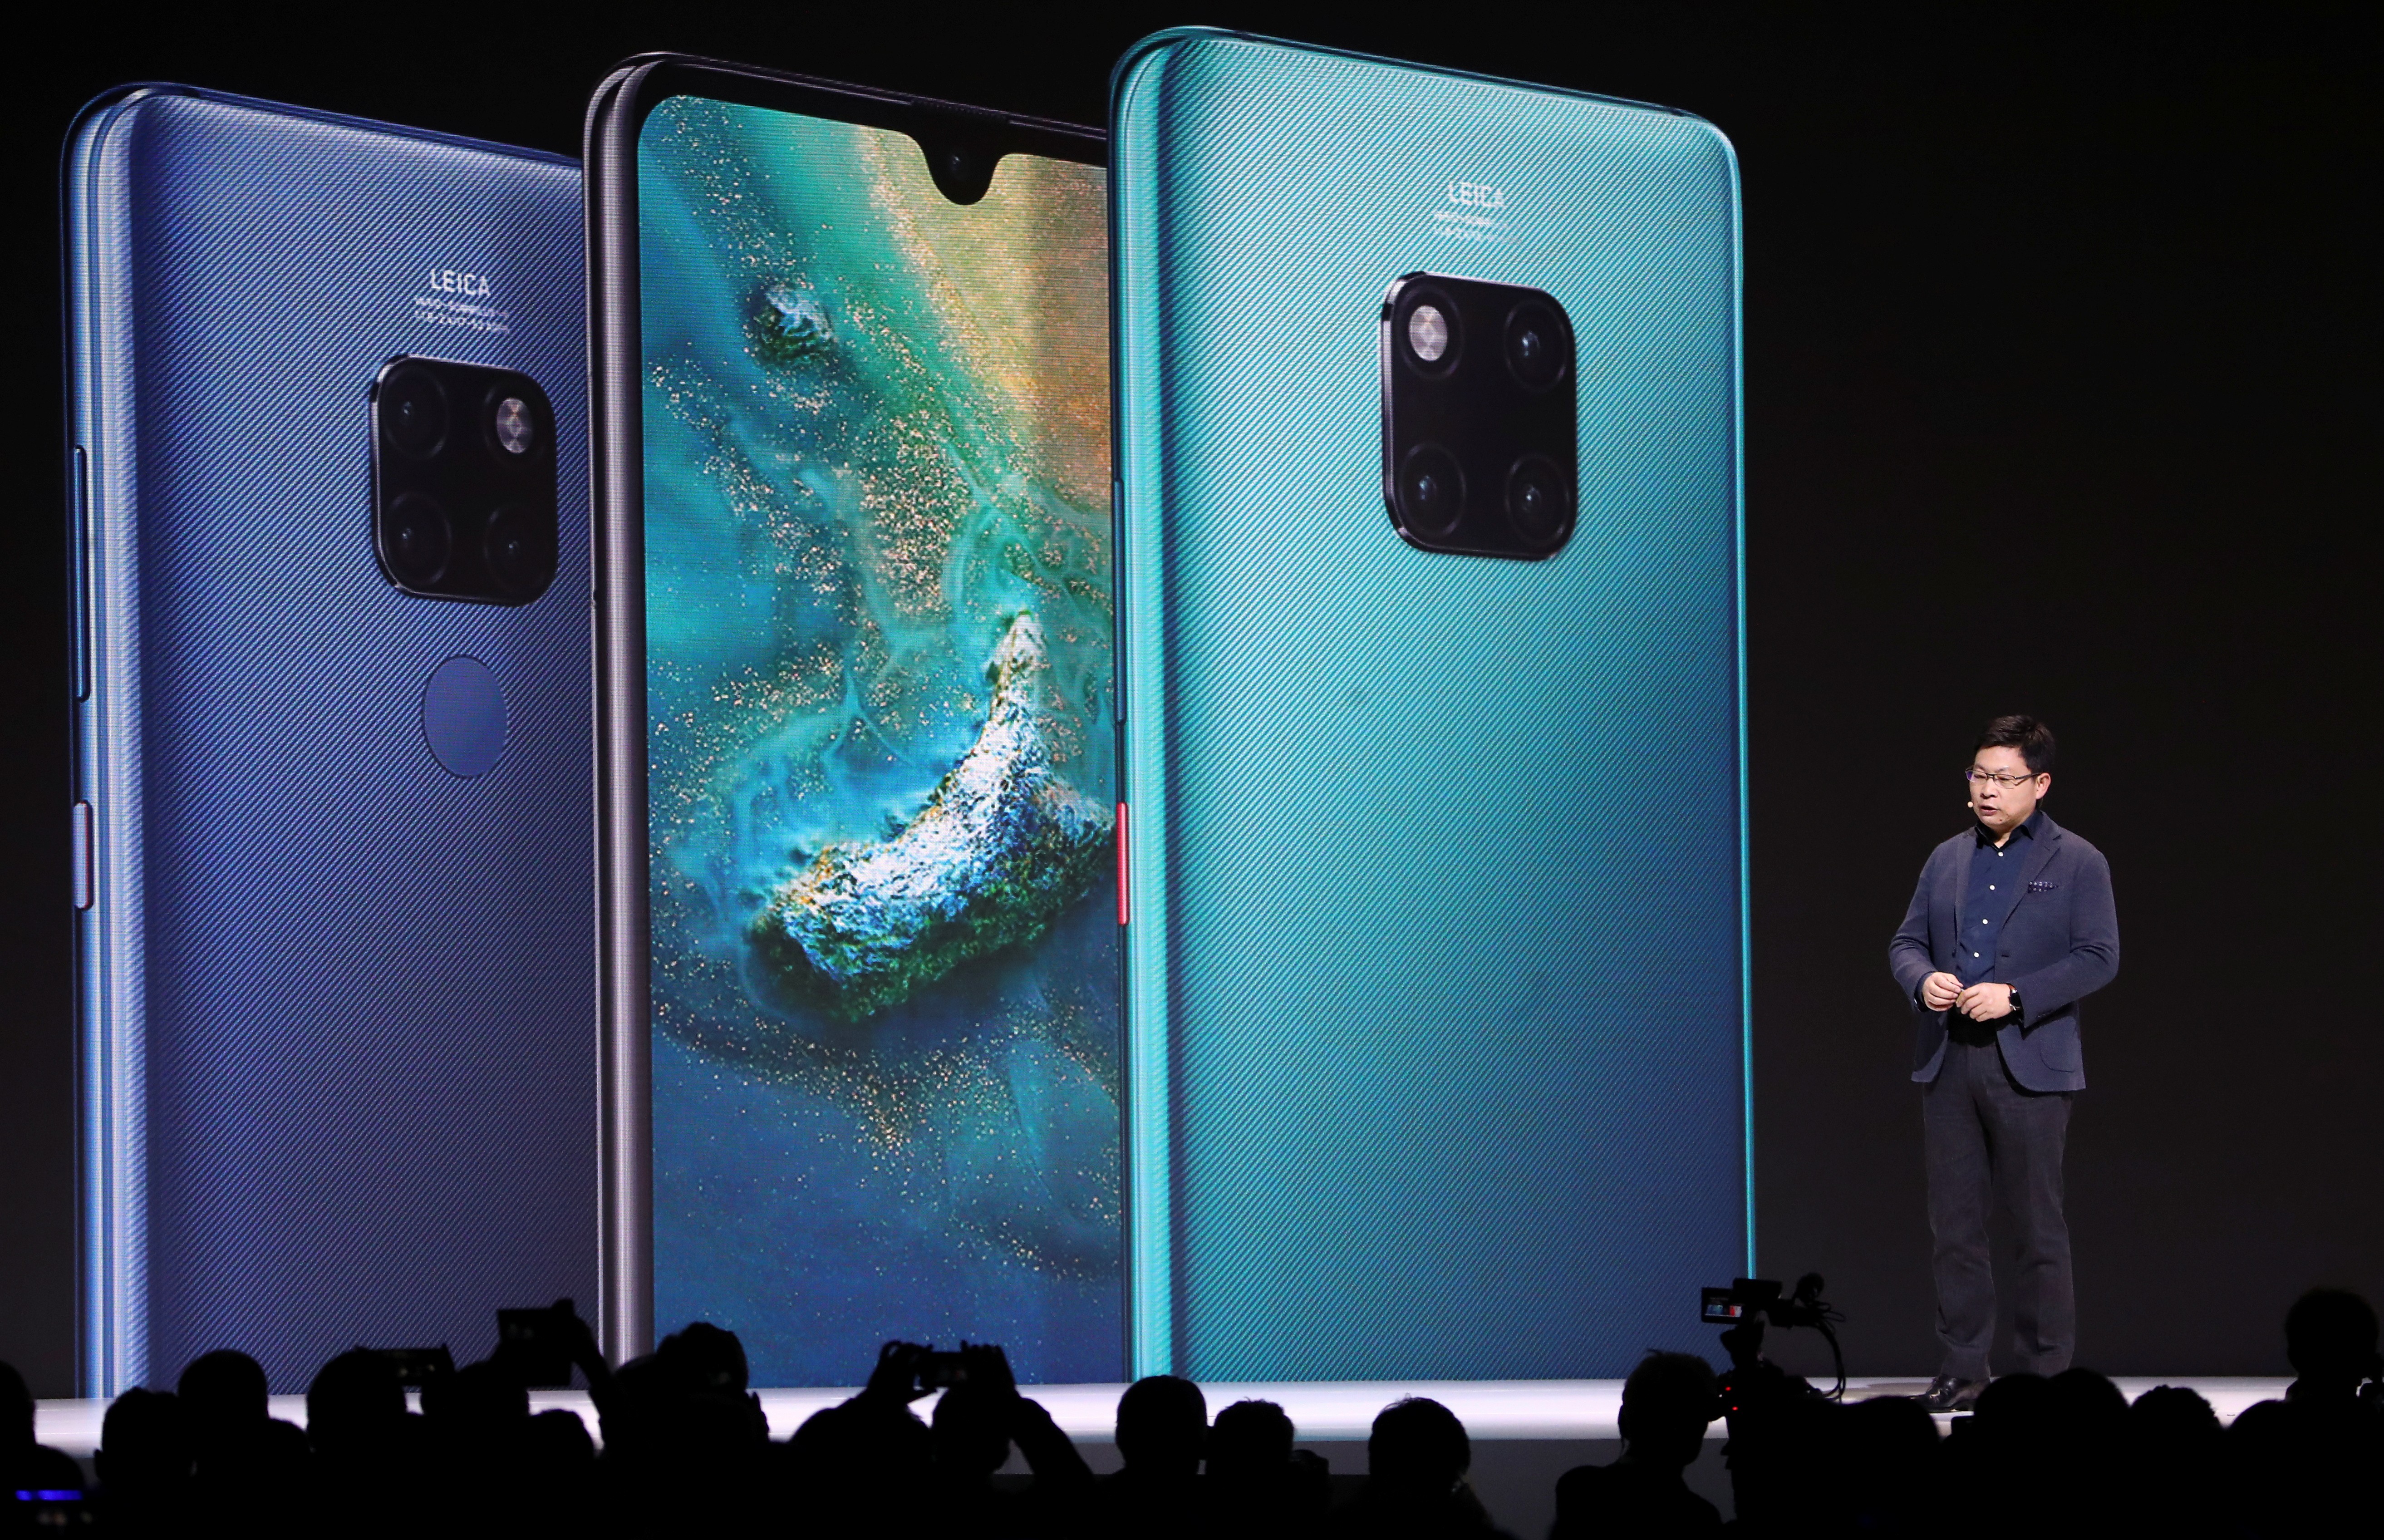 Richard Yu, CEO of Huawei's consumer business group, launches the Mate 30 smartphone in Munich, Germany September 19, 2019. Photo: Reuters